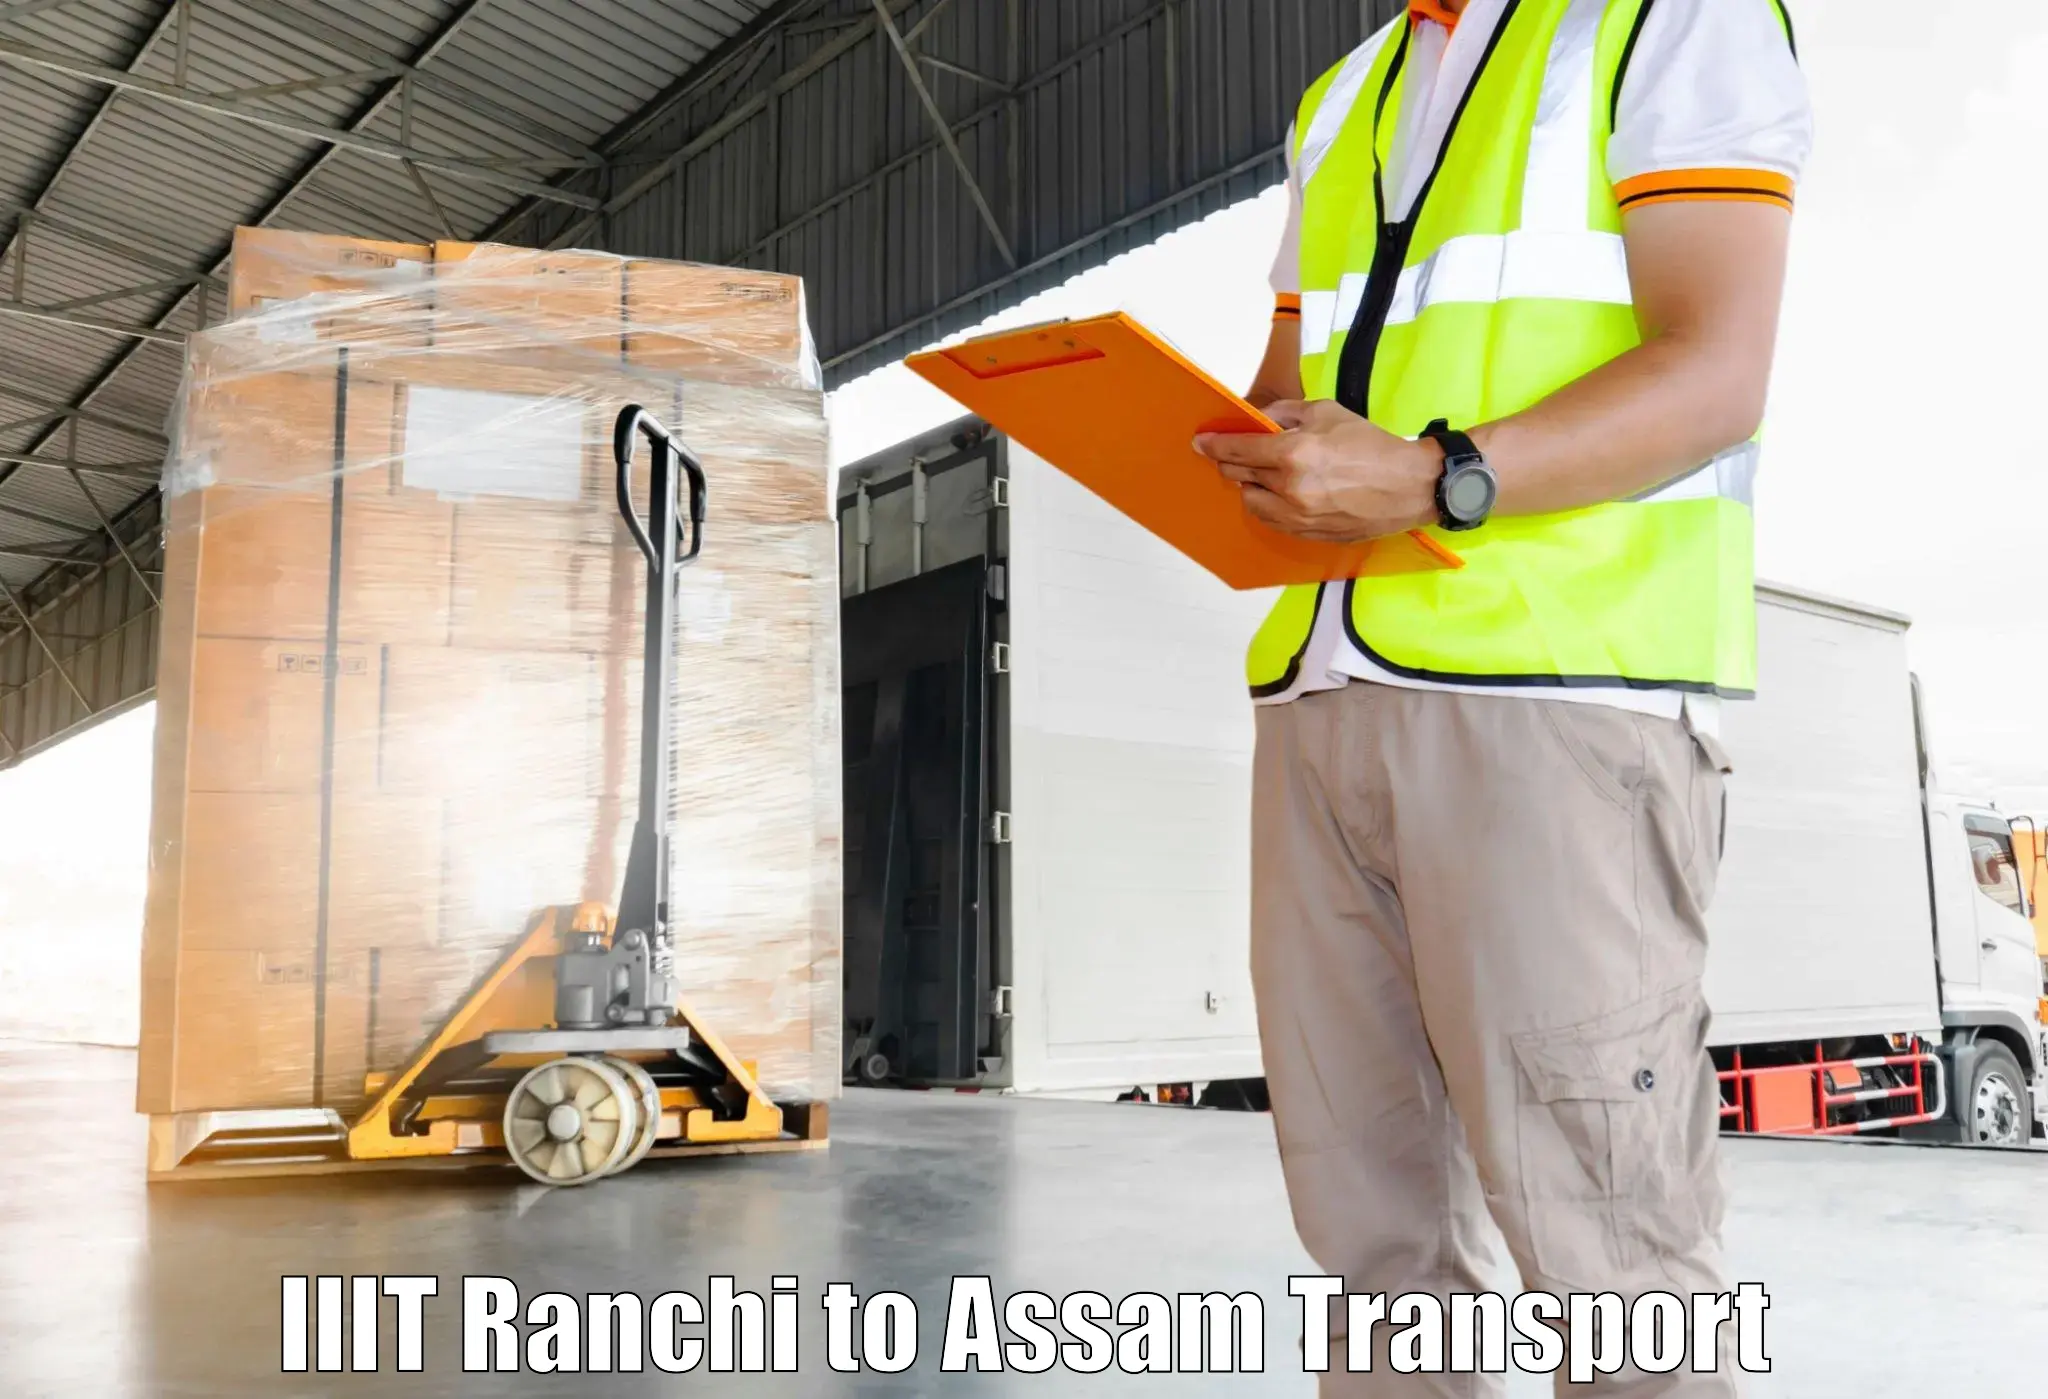 Cycle transportation service IIIT Ranchi to Assam